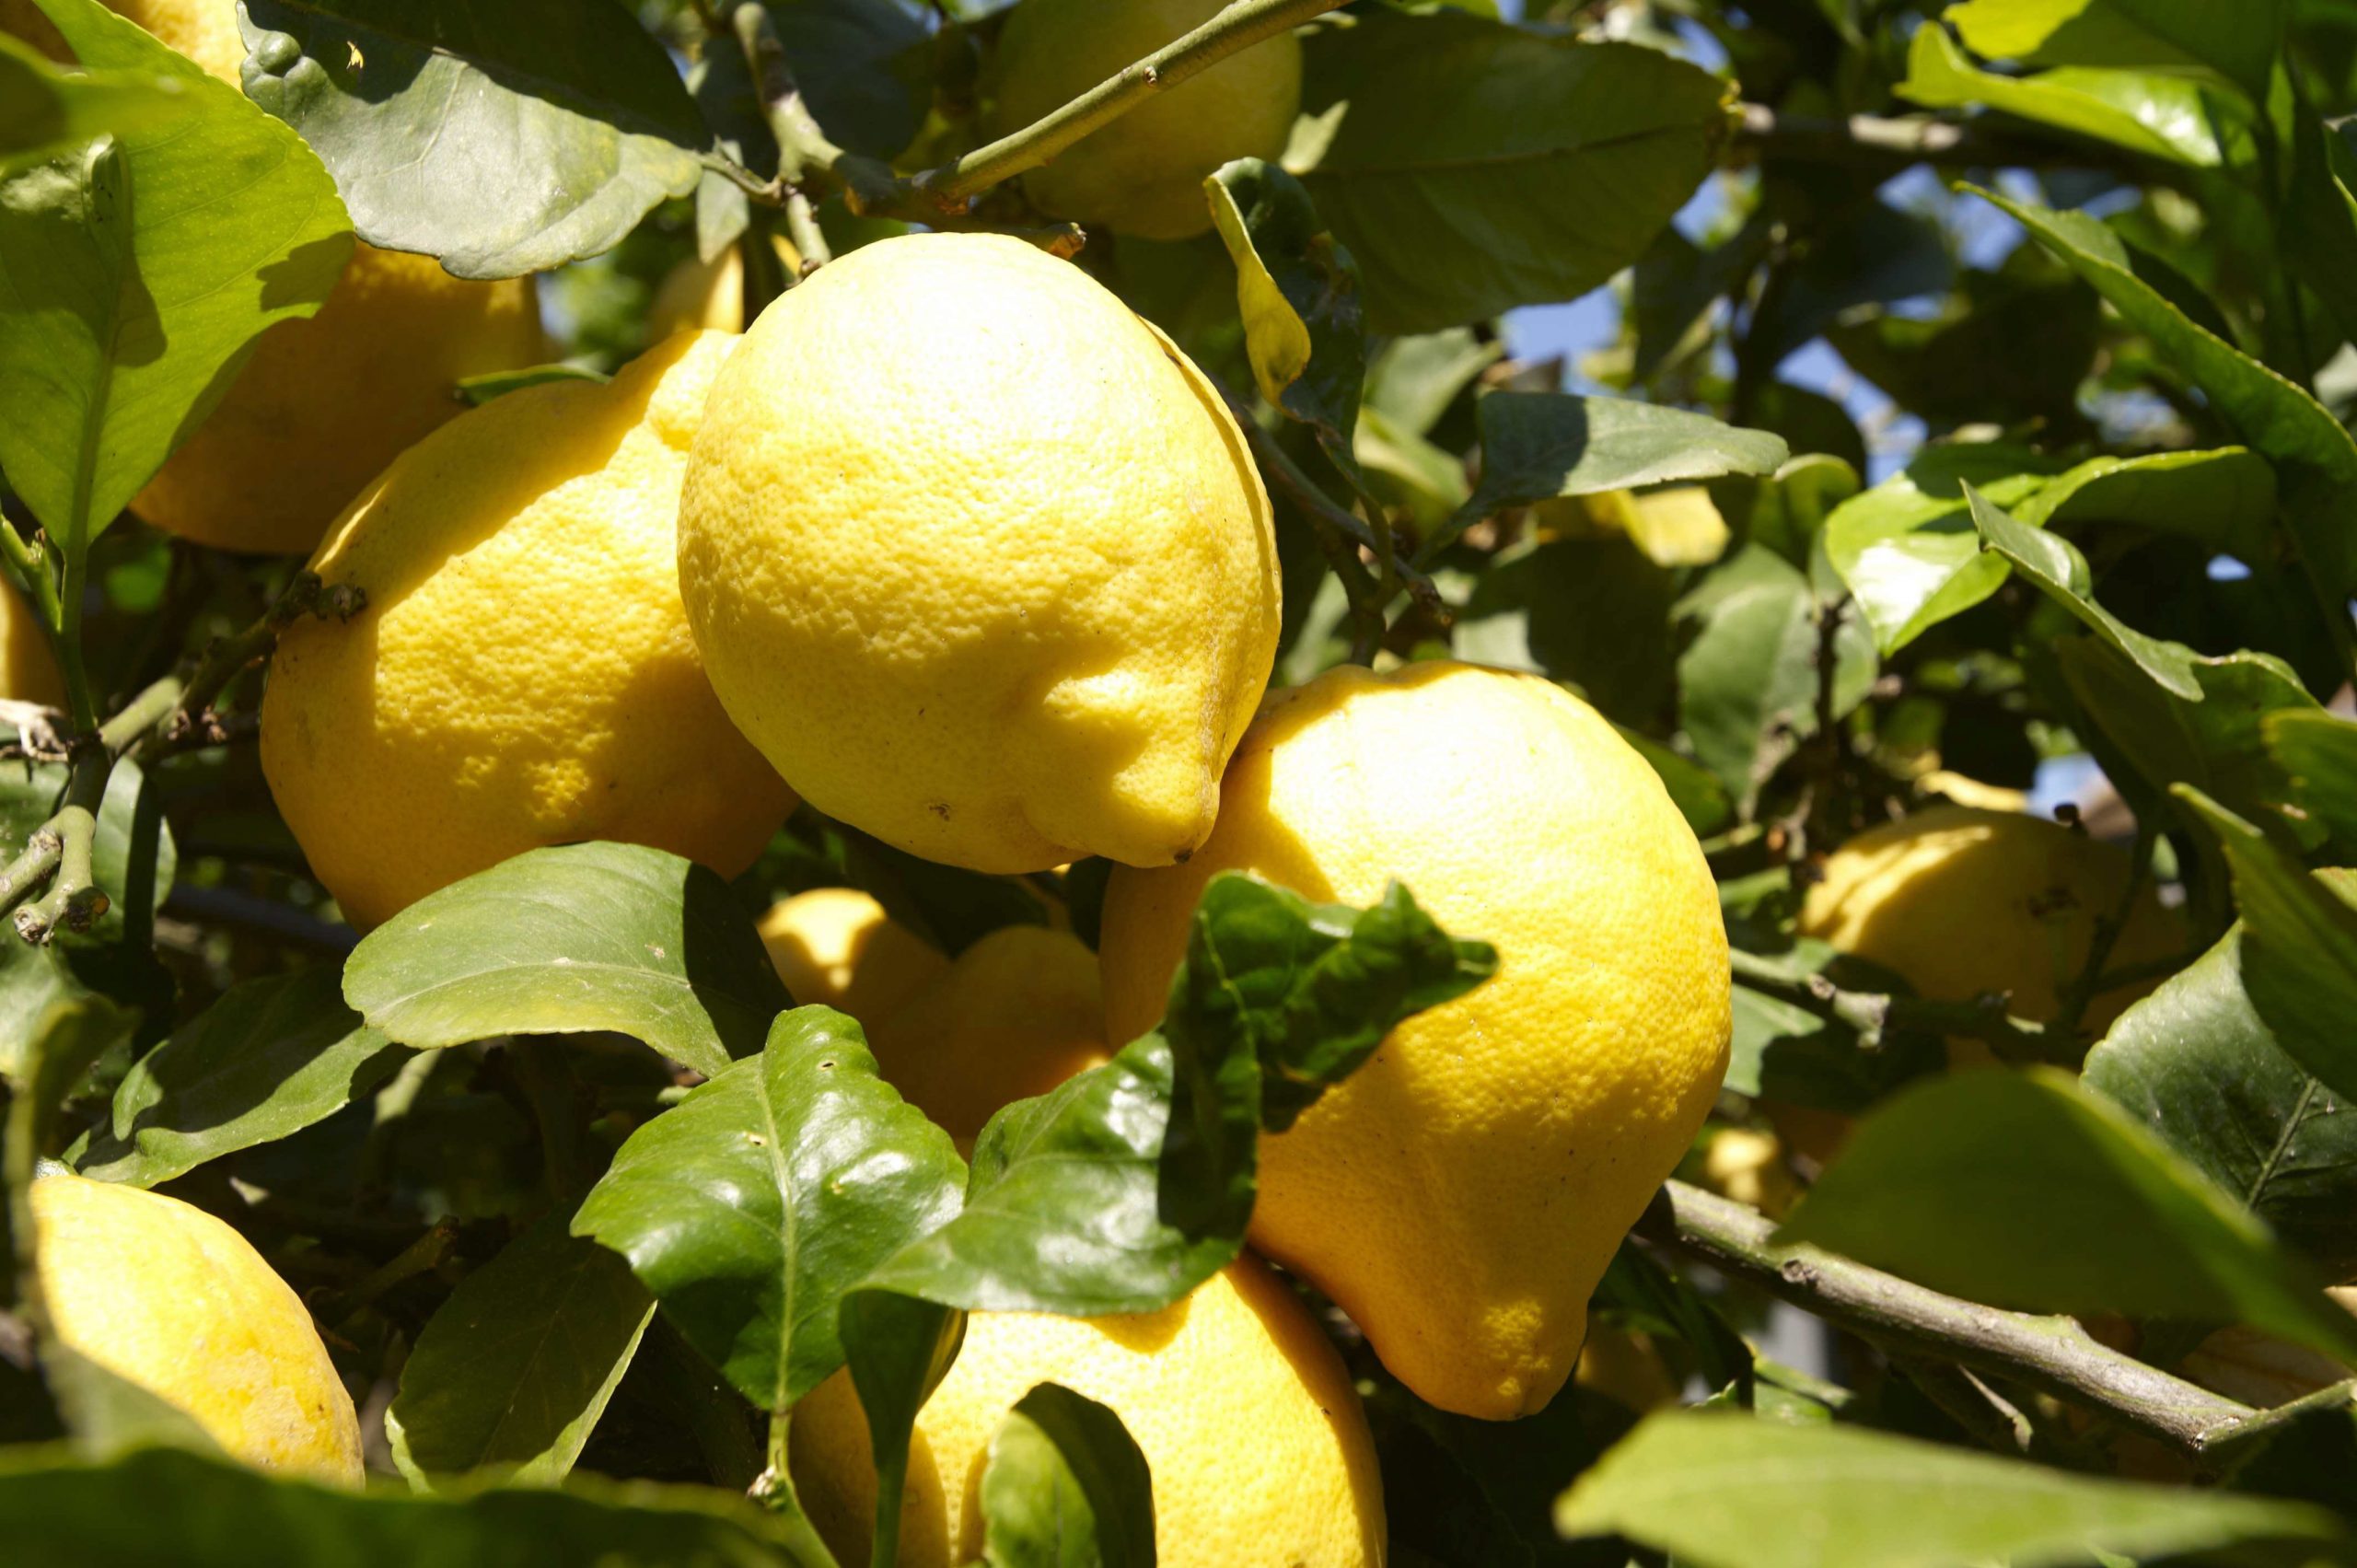 Lemon growers are feeling the squeeze on the Costa Blanca in Spain